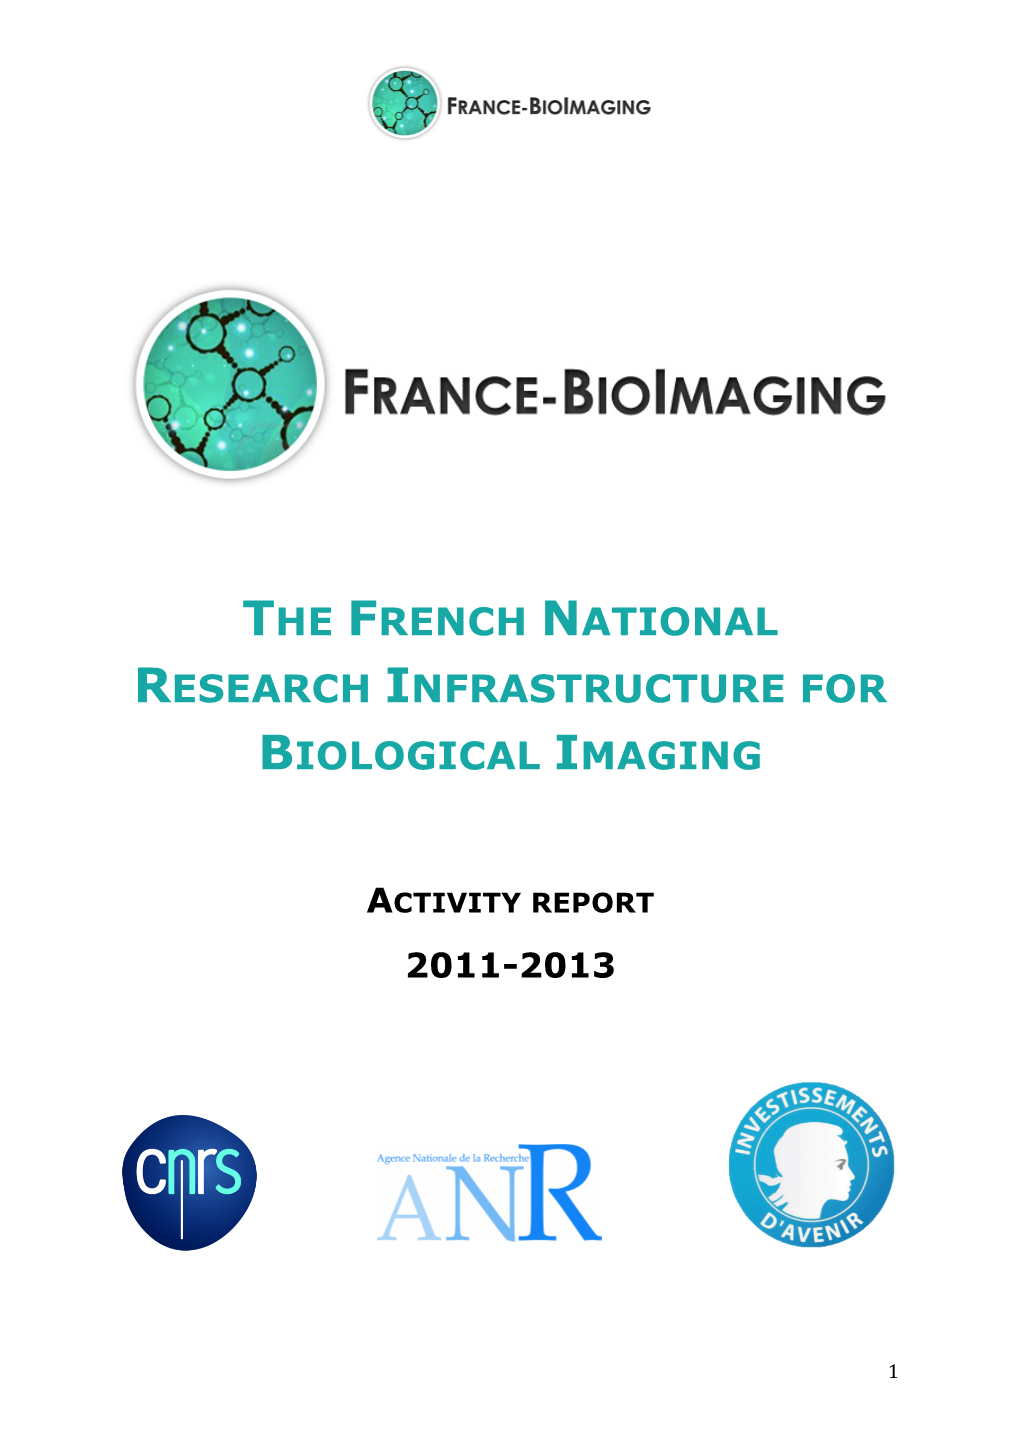 The French National Research Infrastructure for Biological Imaging